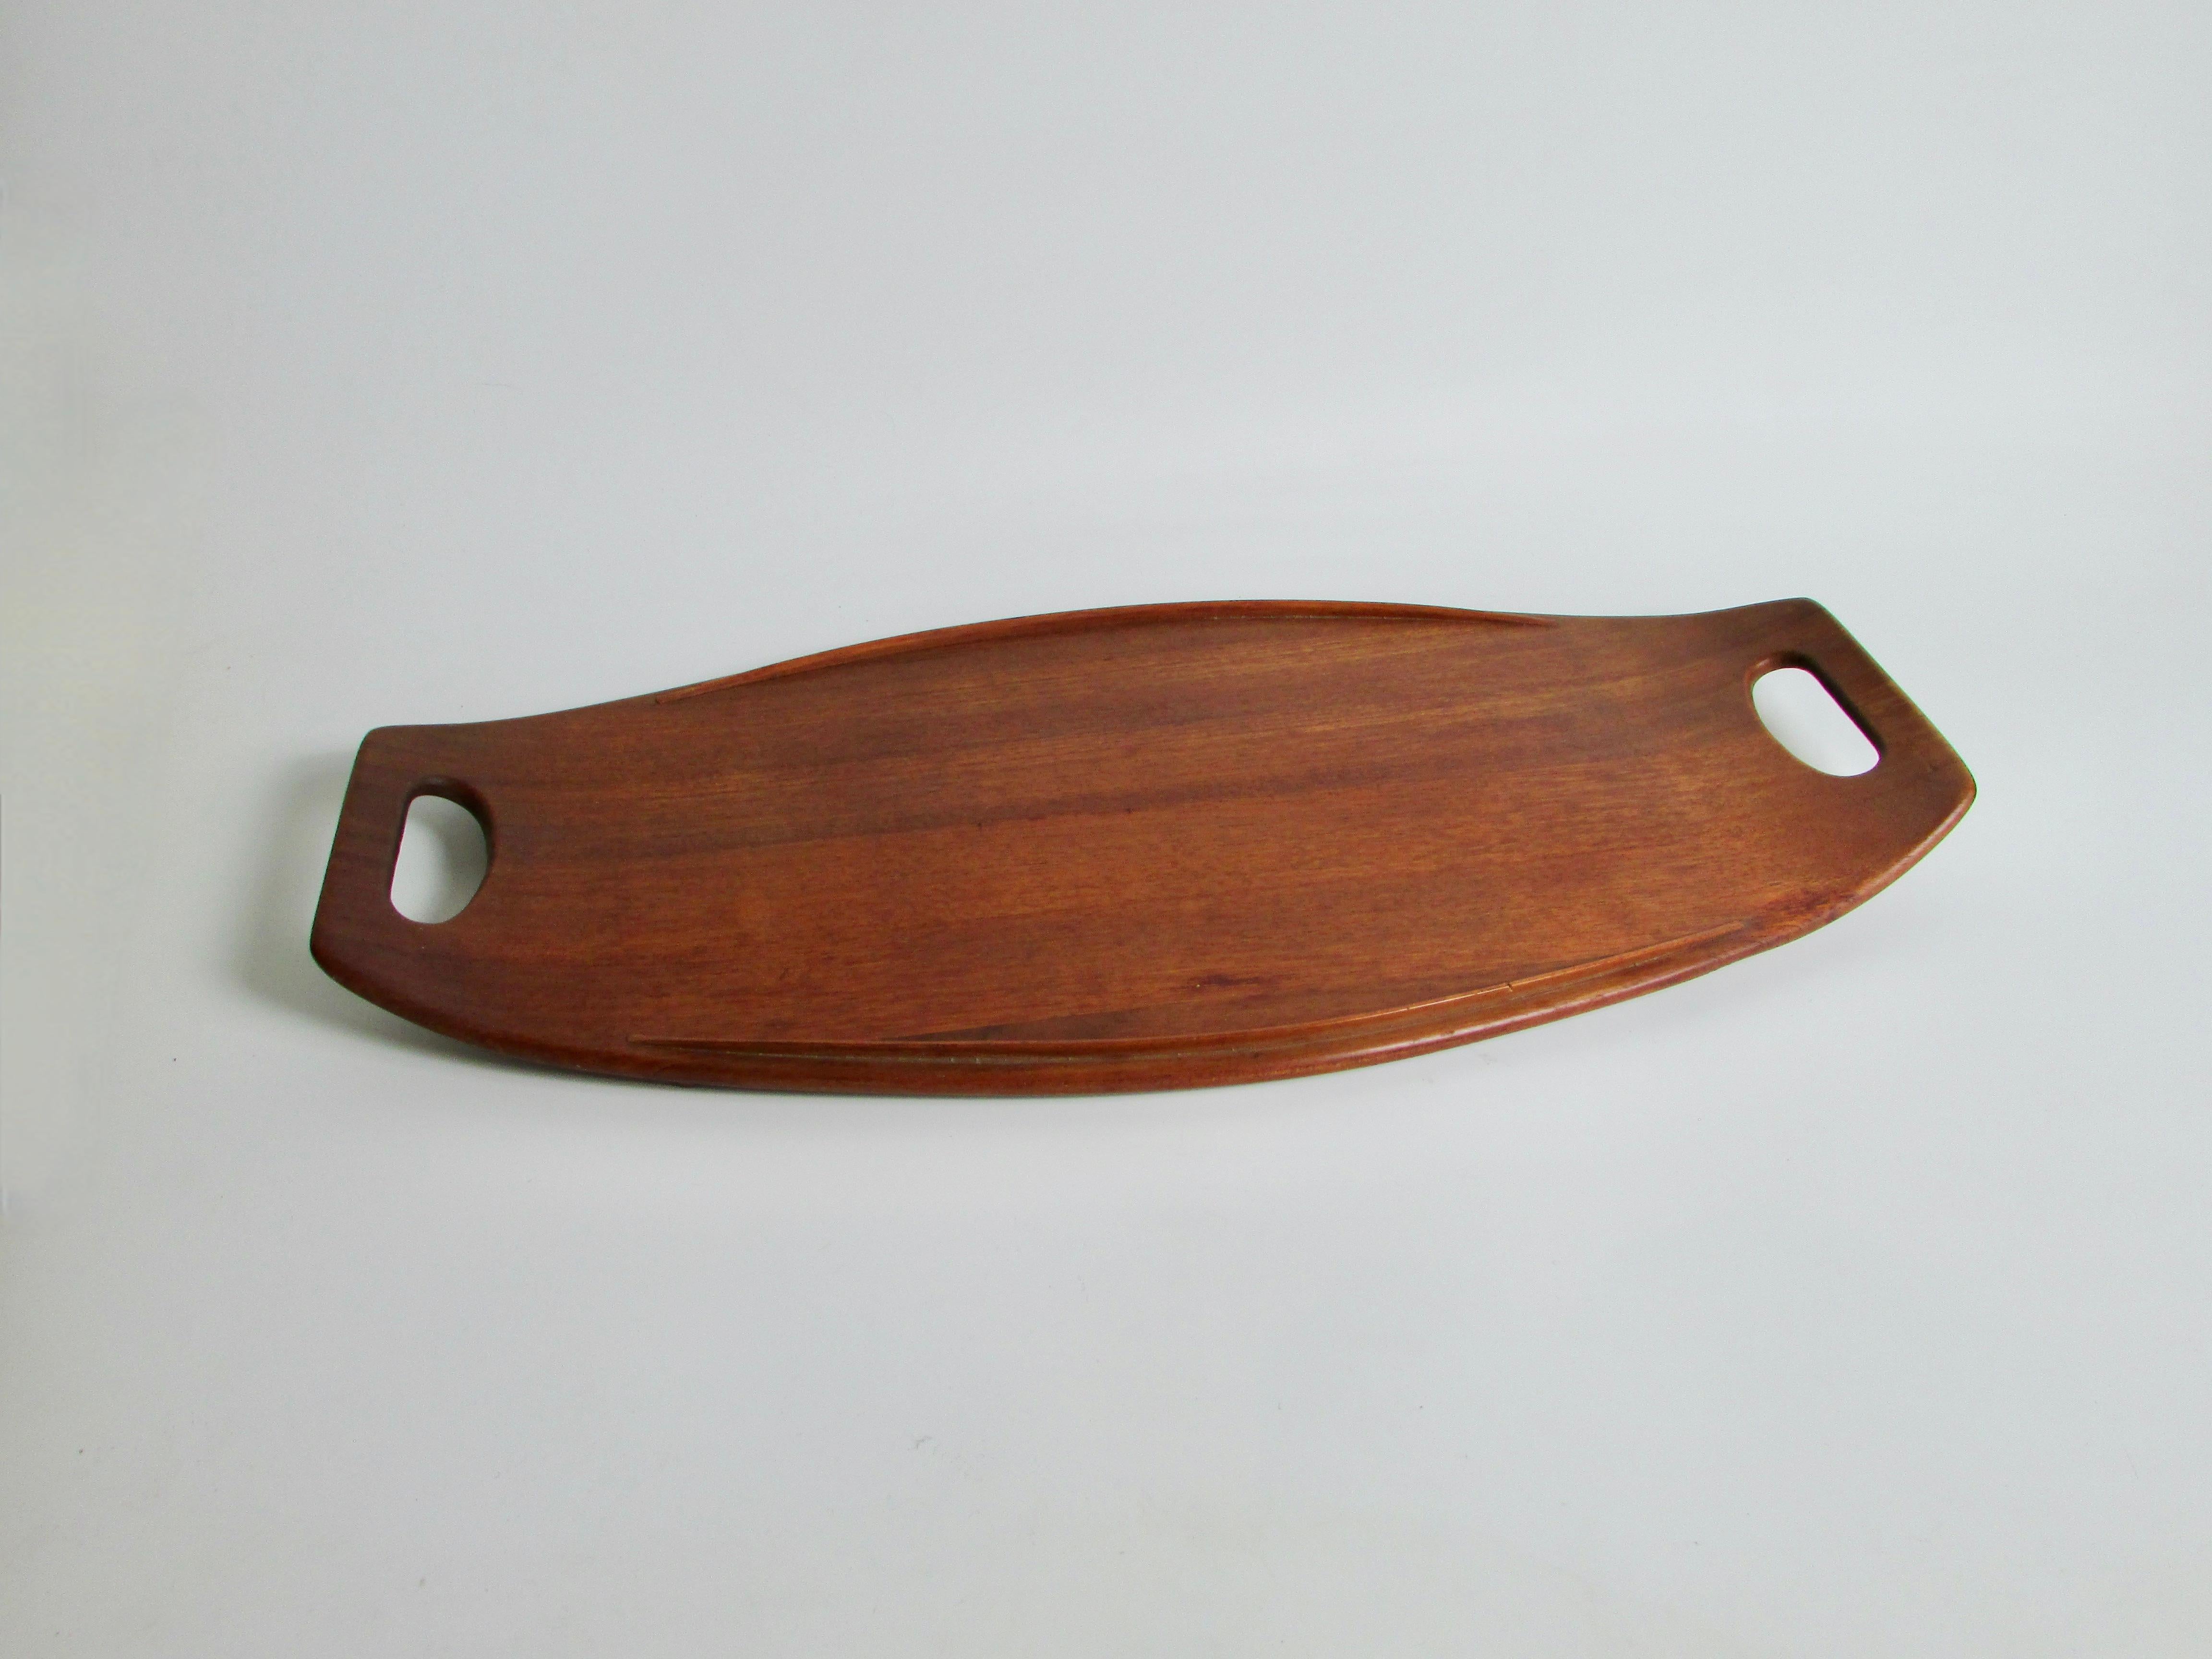 Early Dansk teak tray with duck logo marked JHQ  , staved teak,  Danmark   . Very nice basically un touched condition.